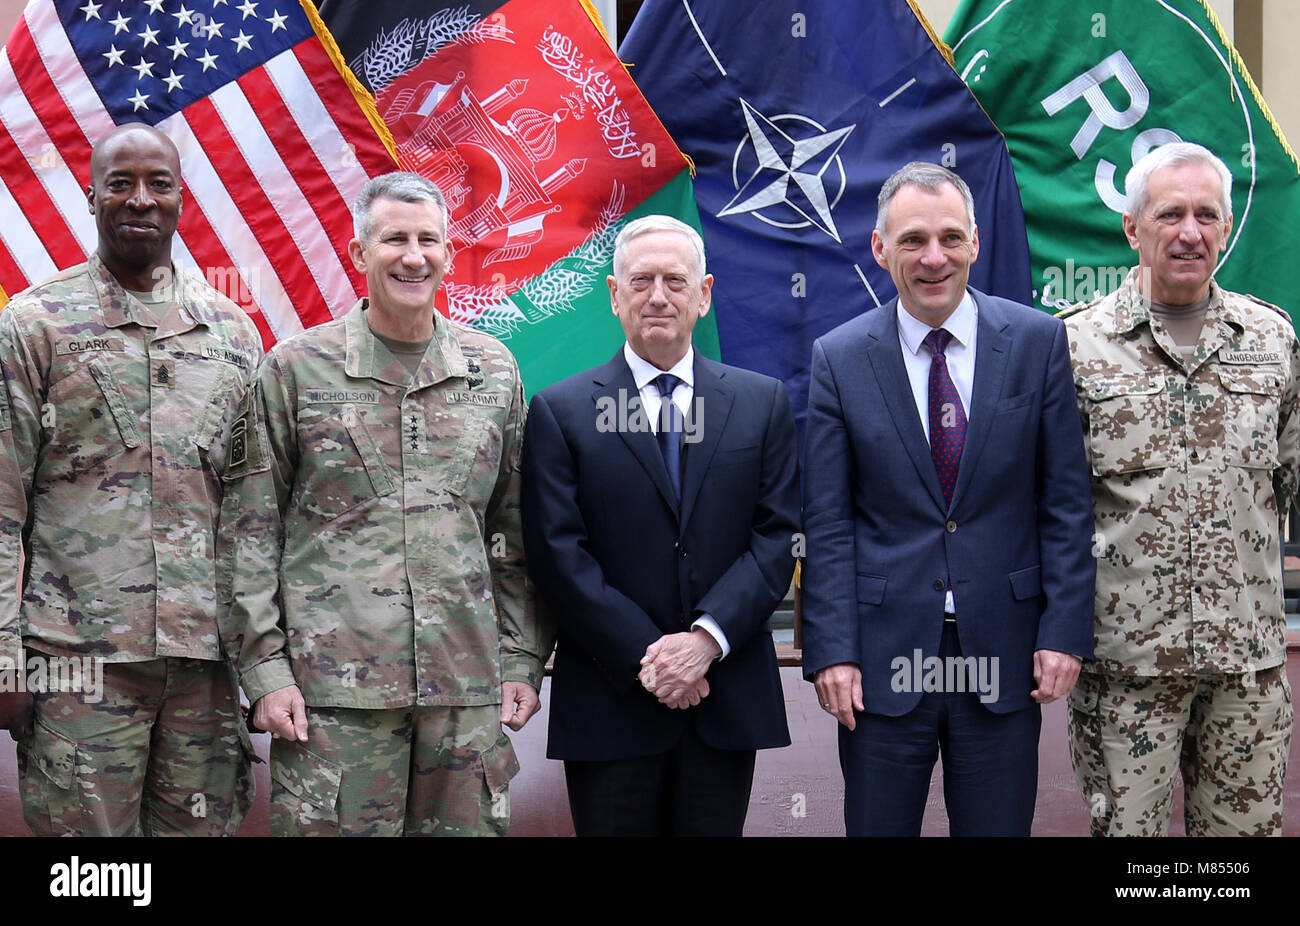 U.S. Secretary of Defense James Mattis visited Resolute Support Mission headquarters in Kabul, Afghanistan, meeting with Gen. John Nicholson, Resolute Support commander, and other senior NATO and Afghan officials to discuss both the military effort and the potential for peace between the Taliban and the Afghan government March 13, 2018. (Photos by Erickson Barnes) Stock Photo